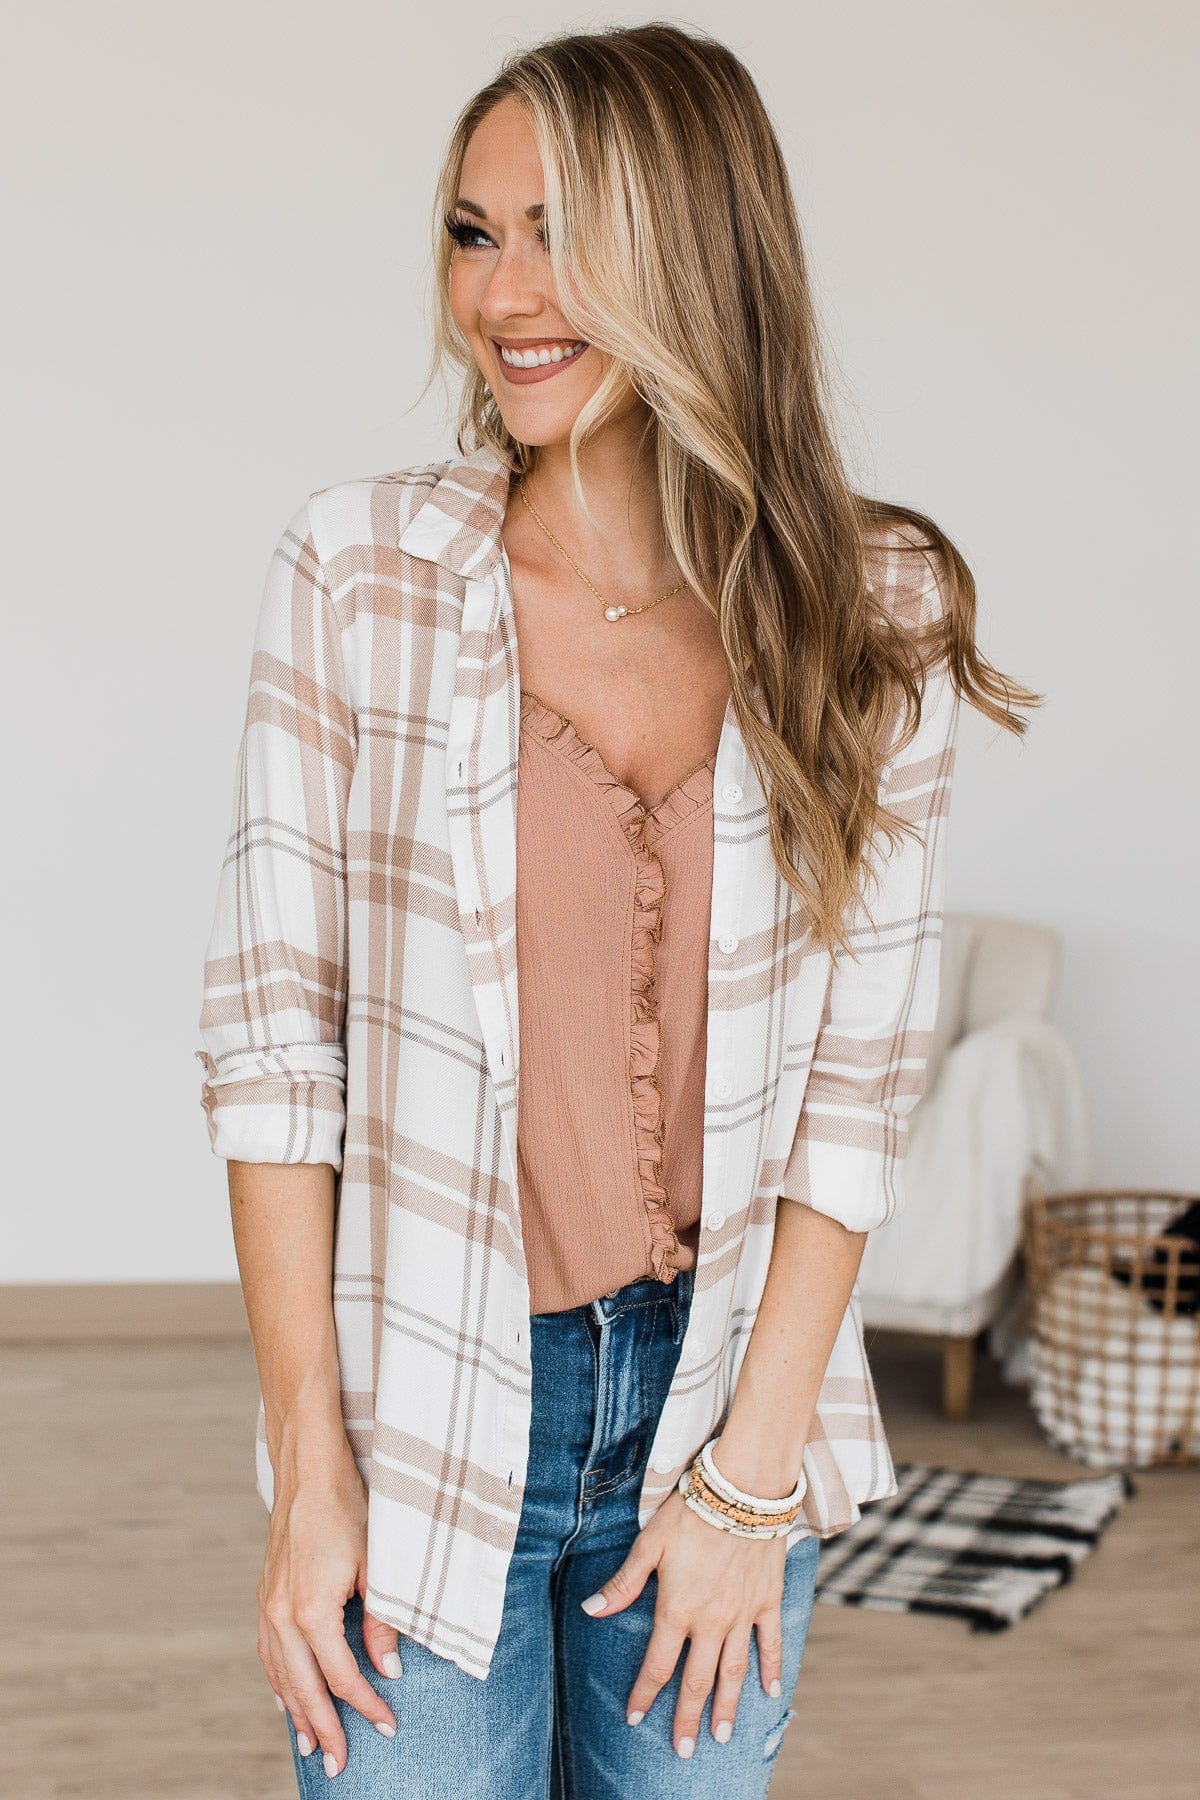 Thread & Supply Can't Stop Me Now Plaid Top- Ivory & Beige